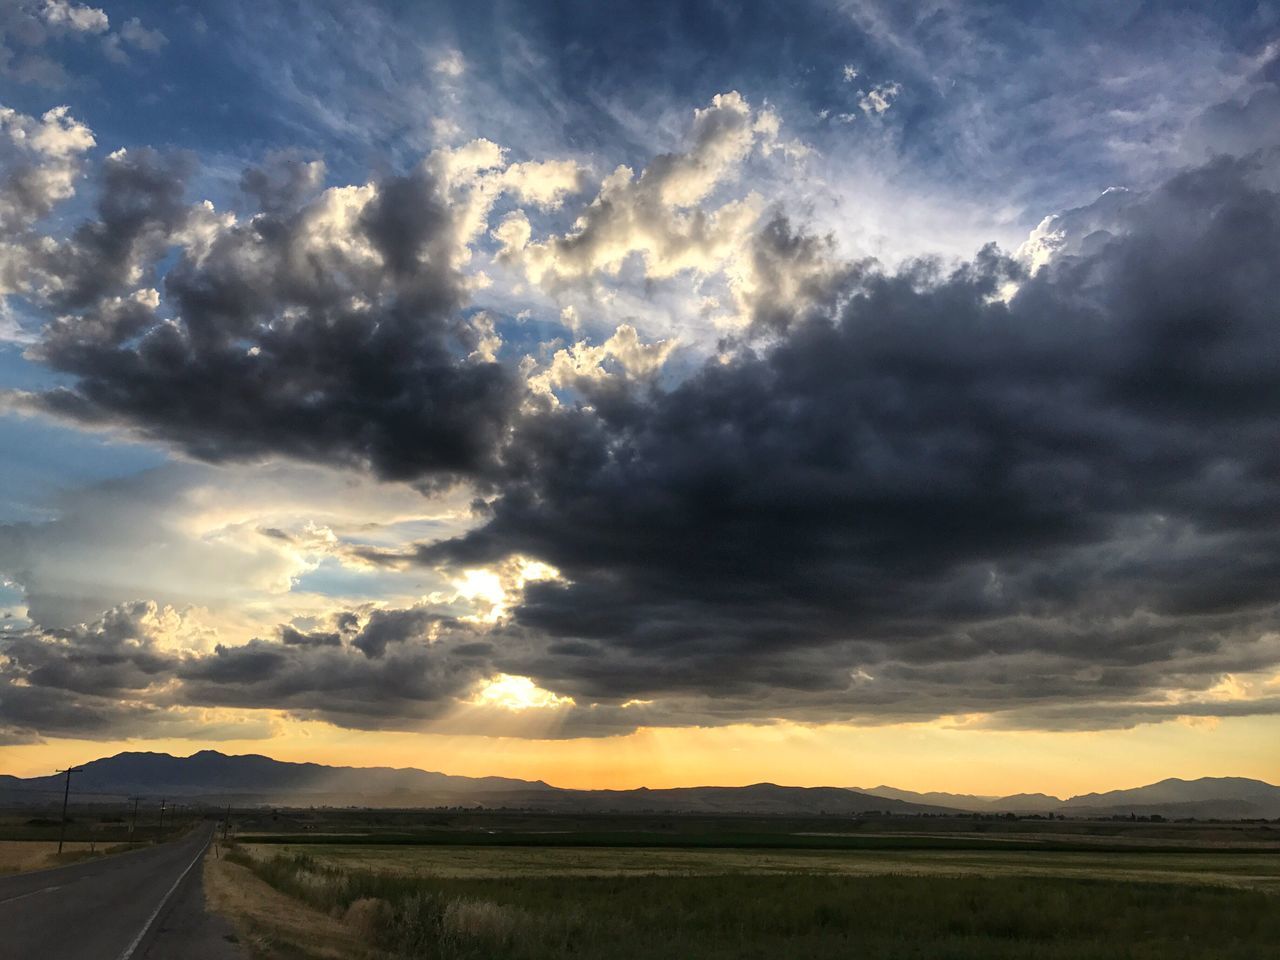 cloud - sky, sky, scenics, sunset, nature, tranquility, tranquil scene, beauty in nature, dramatic sky, landscape, sun, outdoors, no people, the way forward, road, day